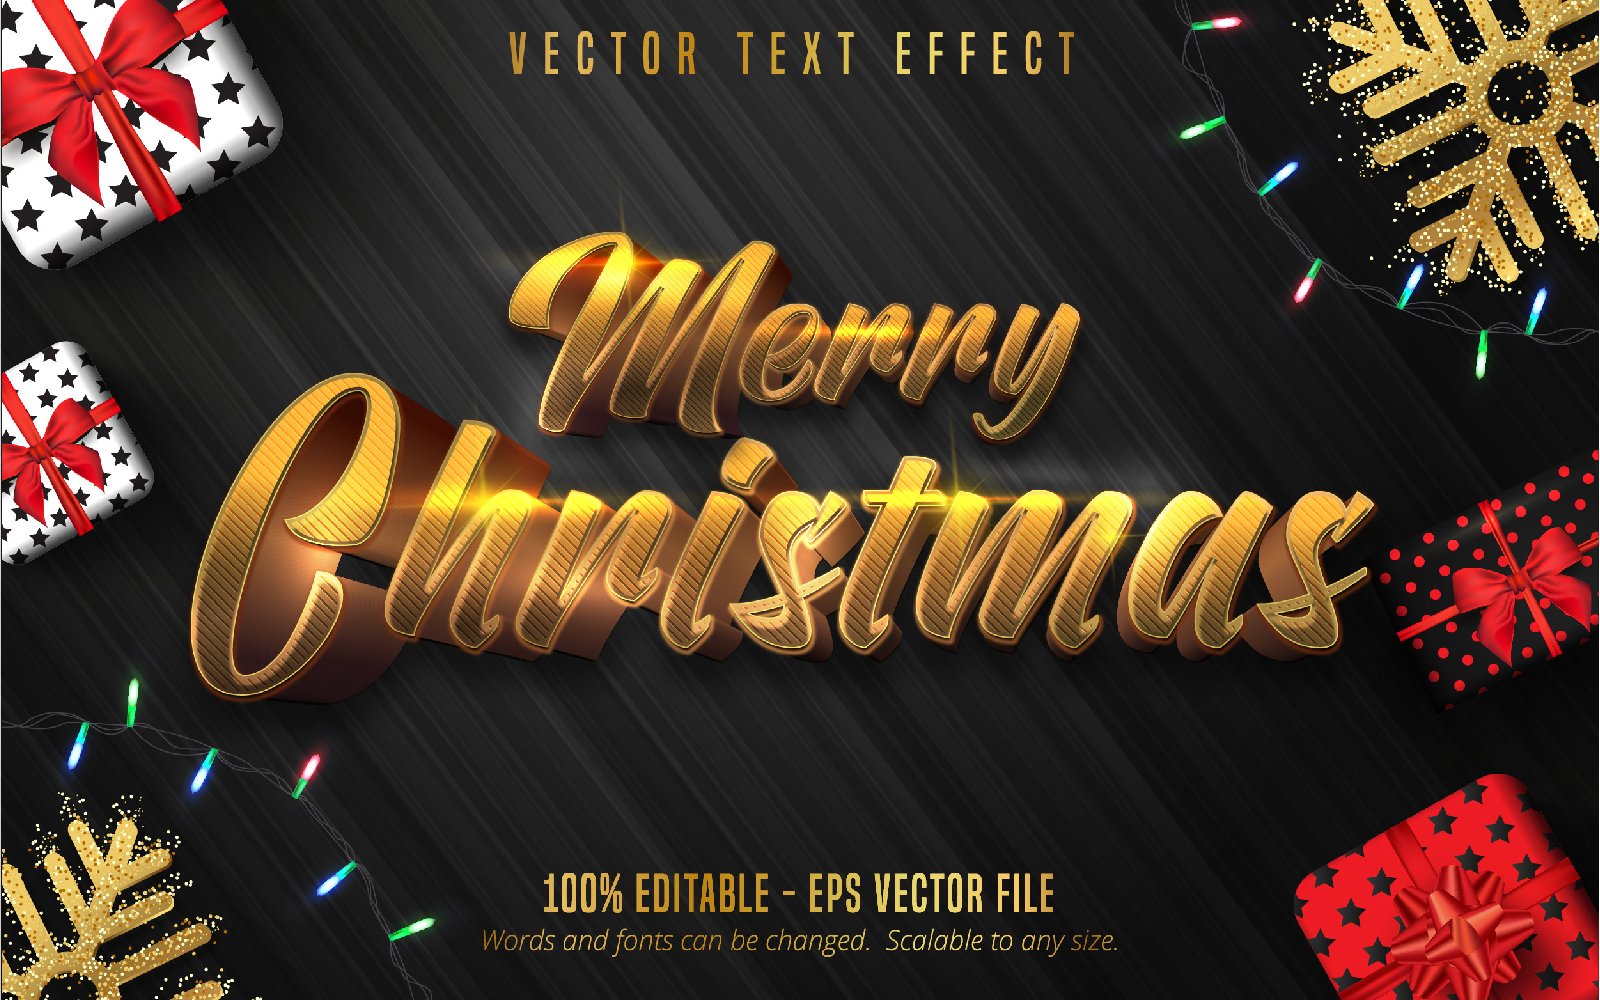 Merry Christmas - Editable Text Effect, Bright Gold Font Style, Graphics Illustration